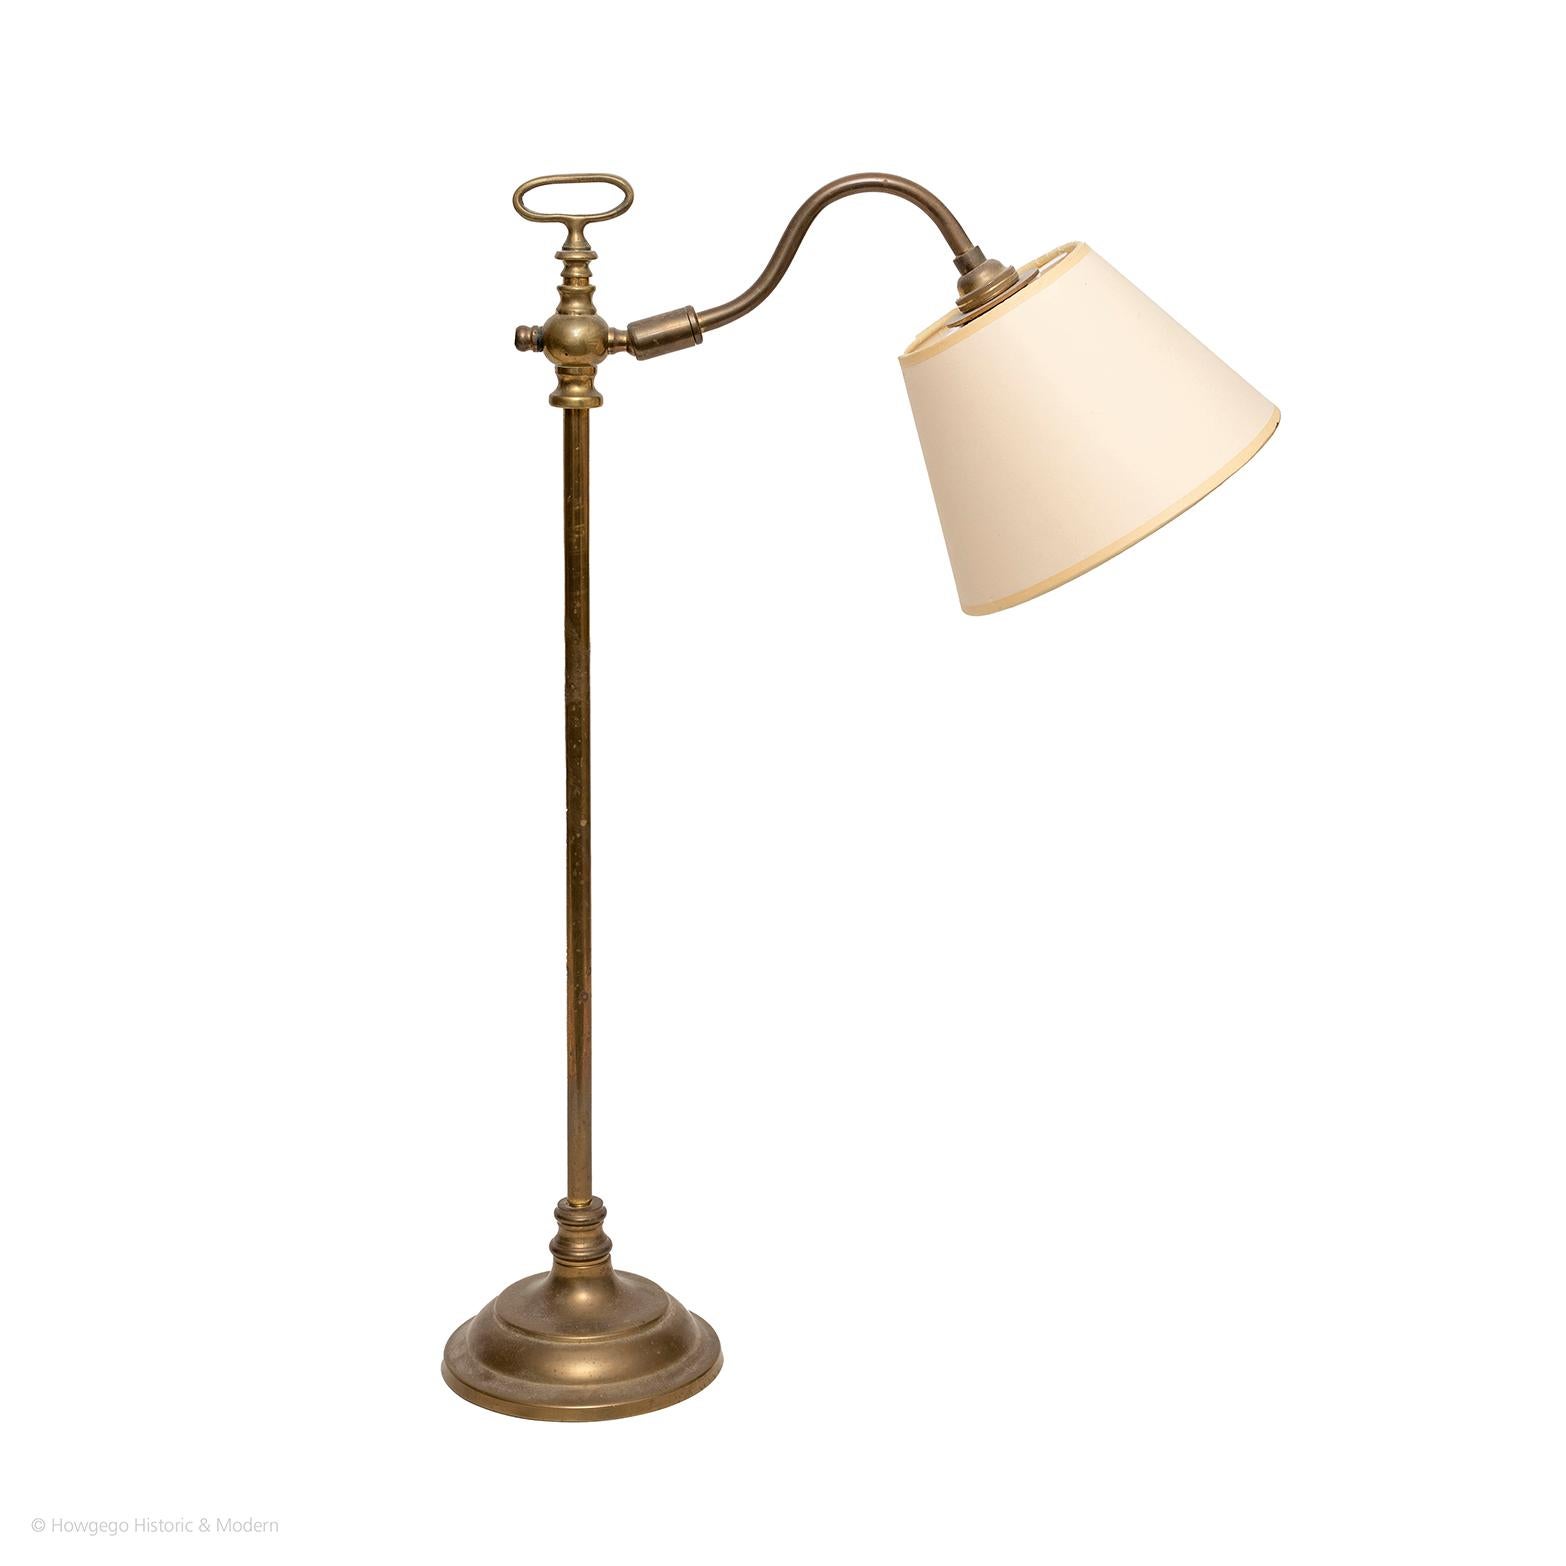 A FINE, EARLY-20th CENTURY, FRENCH, BRASS, ADJUSTABLE, READING LIGHT
Stylish & practical
Elegant, classic form, the base with a delicate ball border, the stem and arm with reeding and decorative handle at the top.
Practical and suitable for